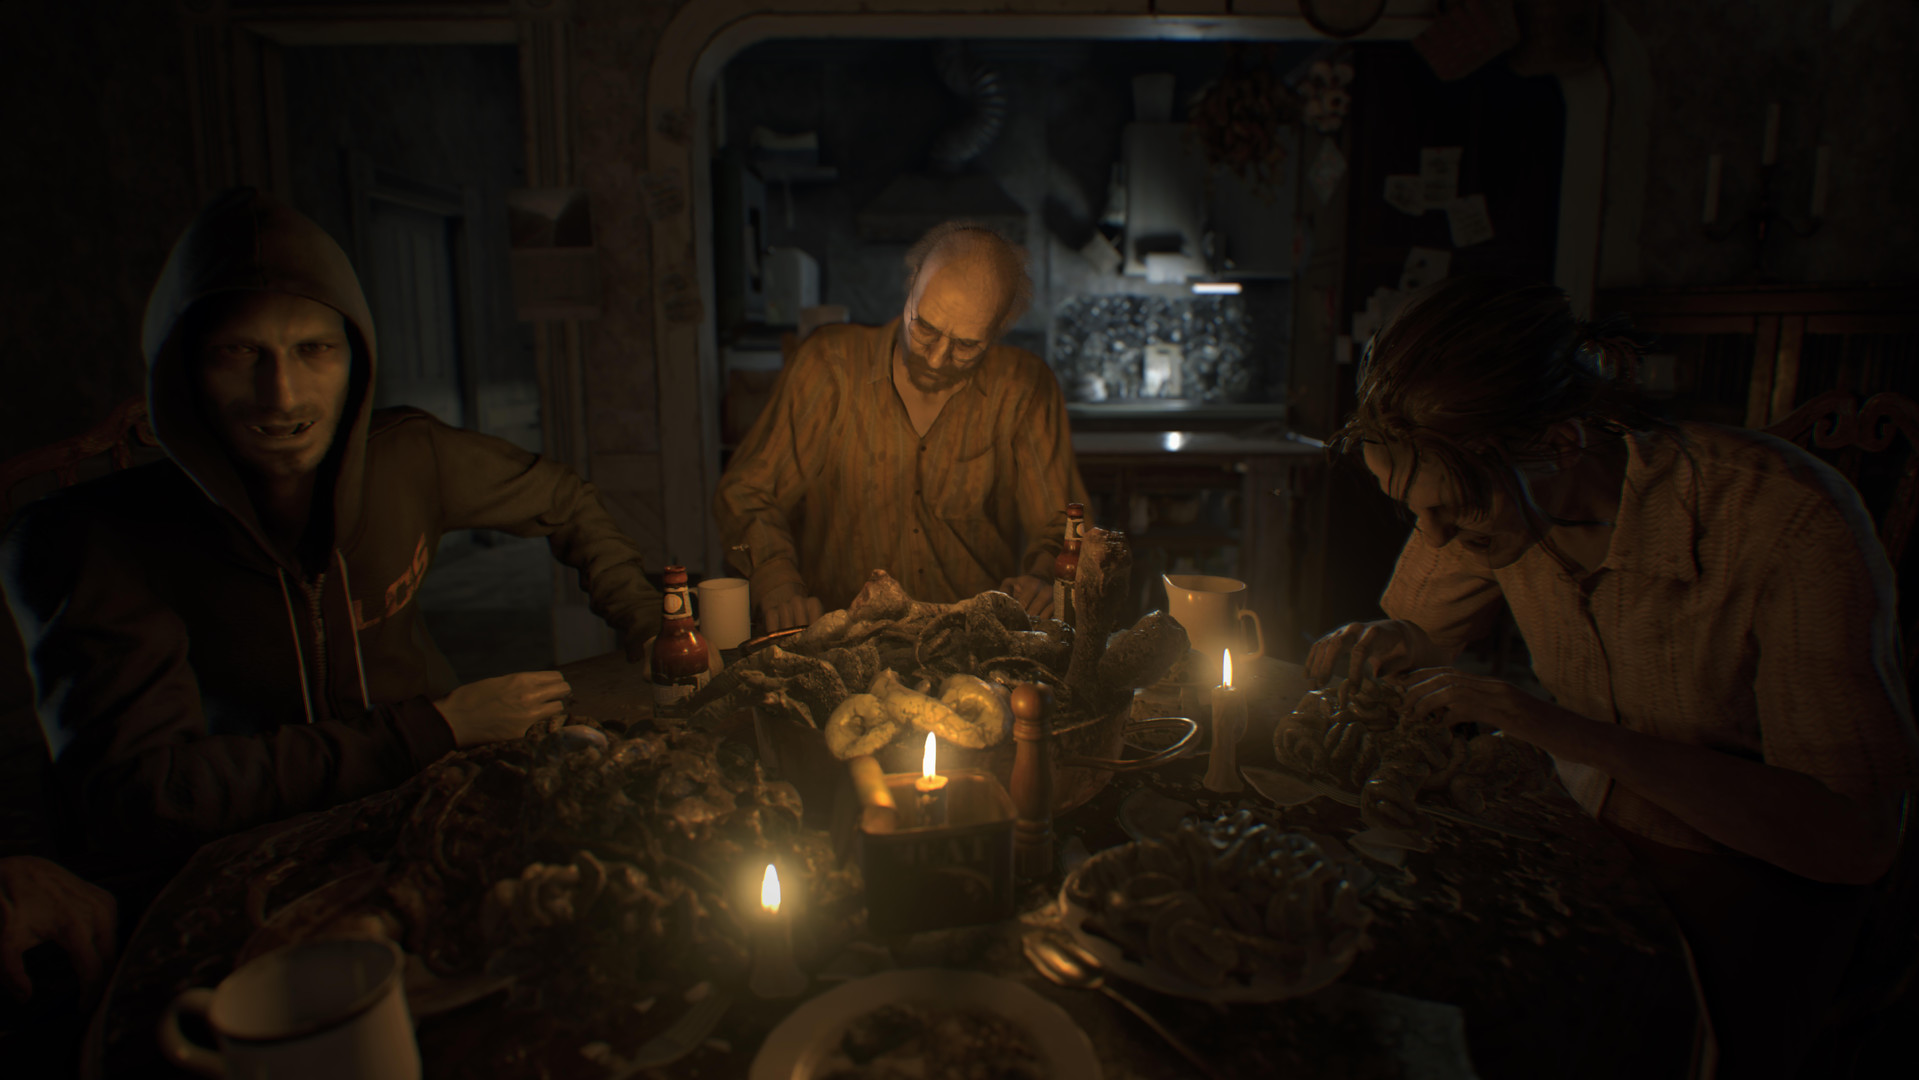 Resident Evil 7: Biohazard was originally planned to feature online  multiplayer with microtransactions